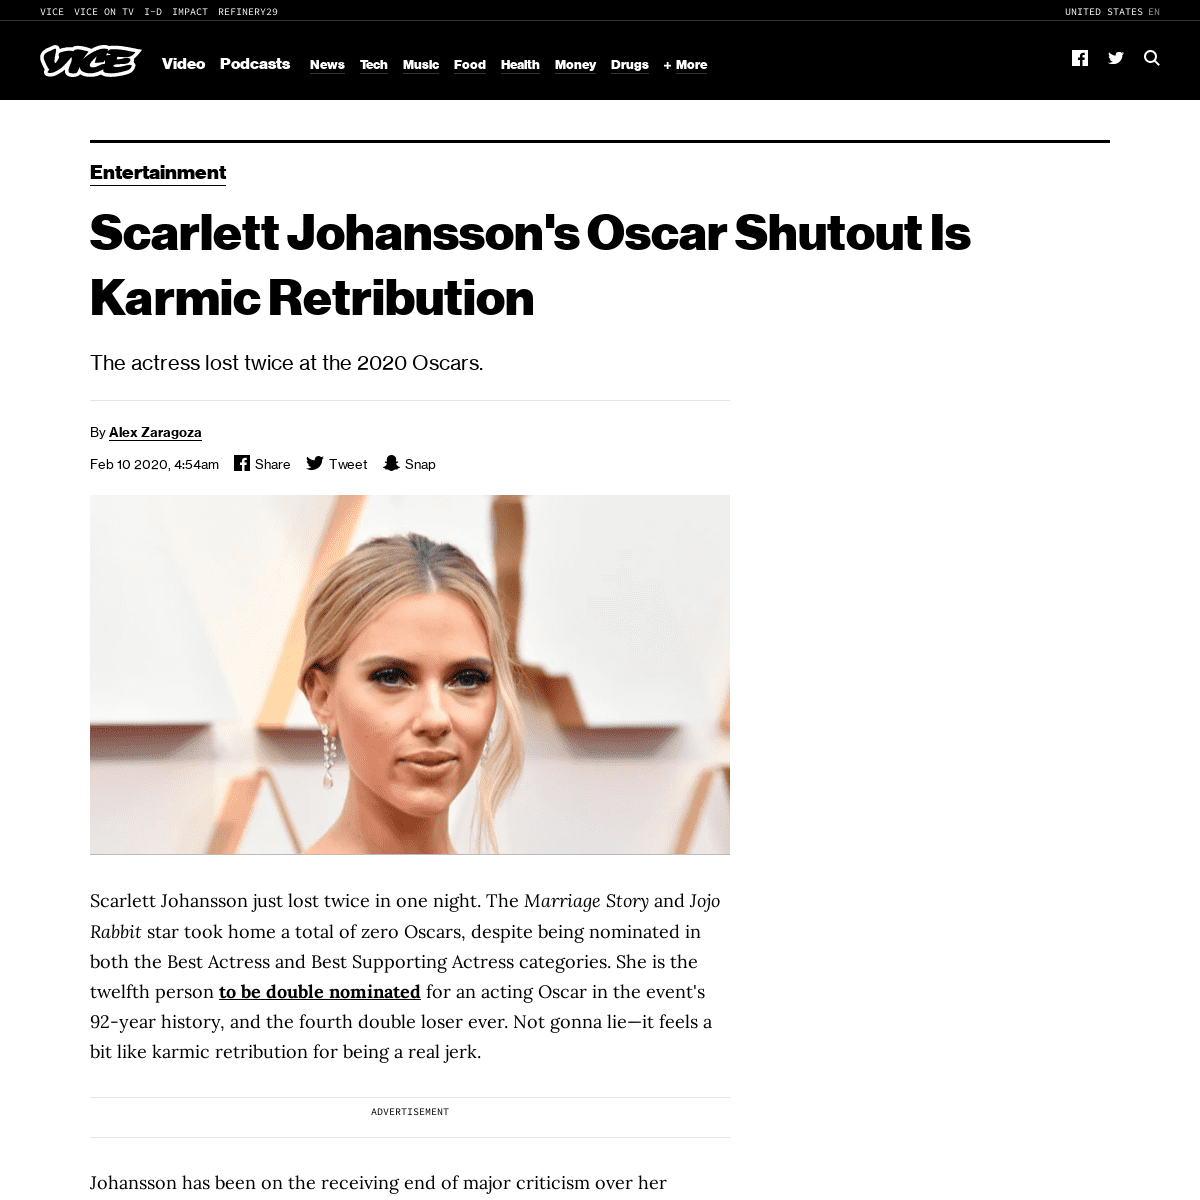 A complete backup of www.vice.com/en_us/article/xgqgen/scarlett-johansson-was-snubbed-at-the-2020-oscars-but-maybe-she-deserved-